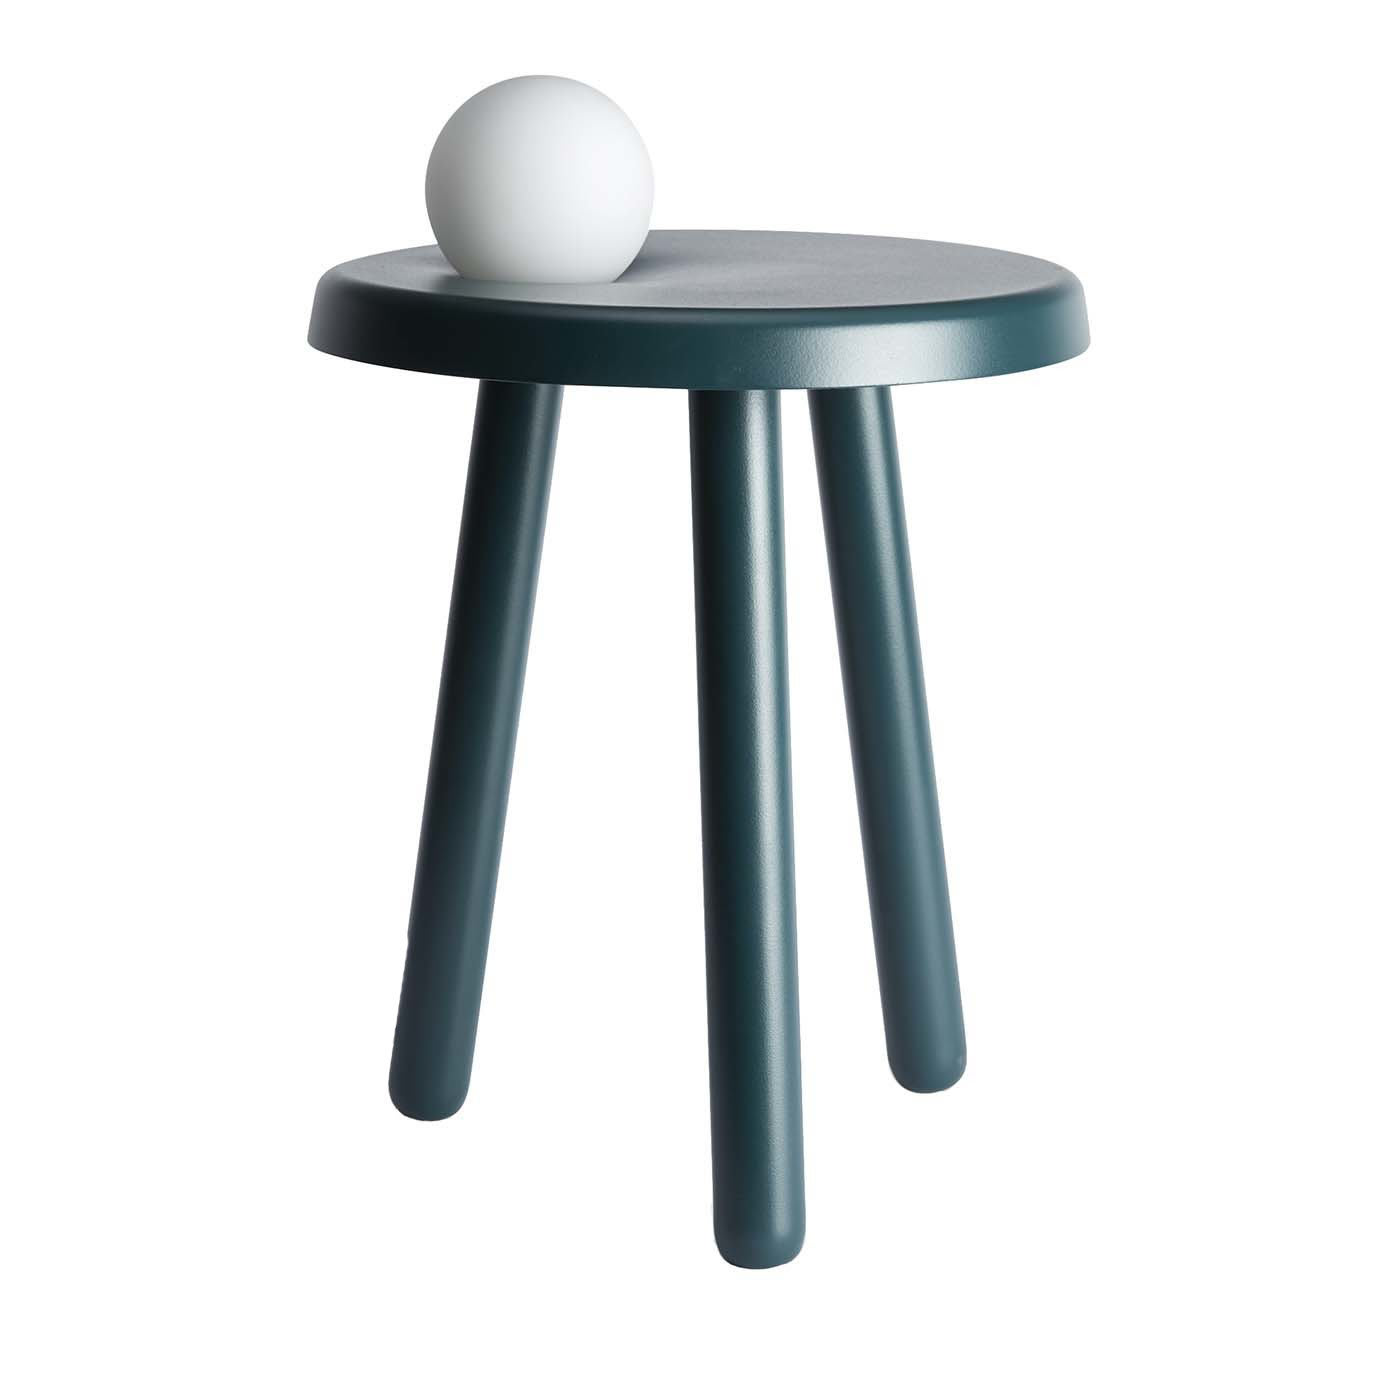 Alby Green Side Table with Light - Mason Editions